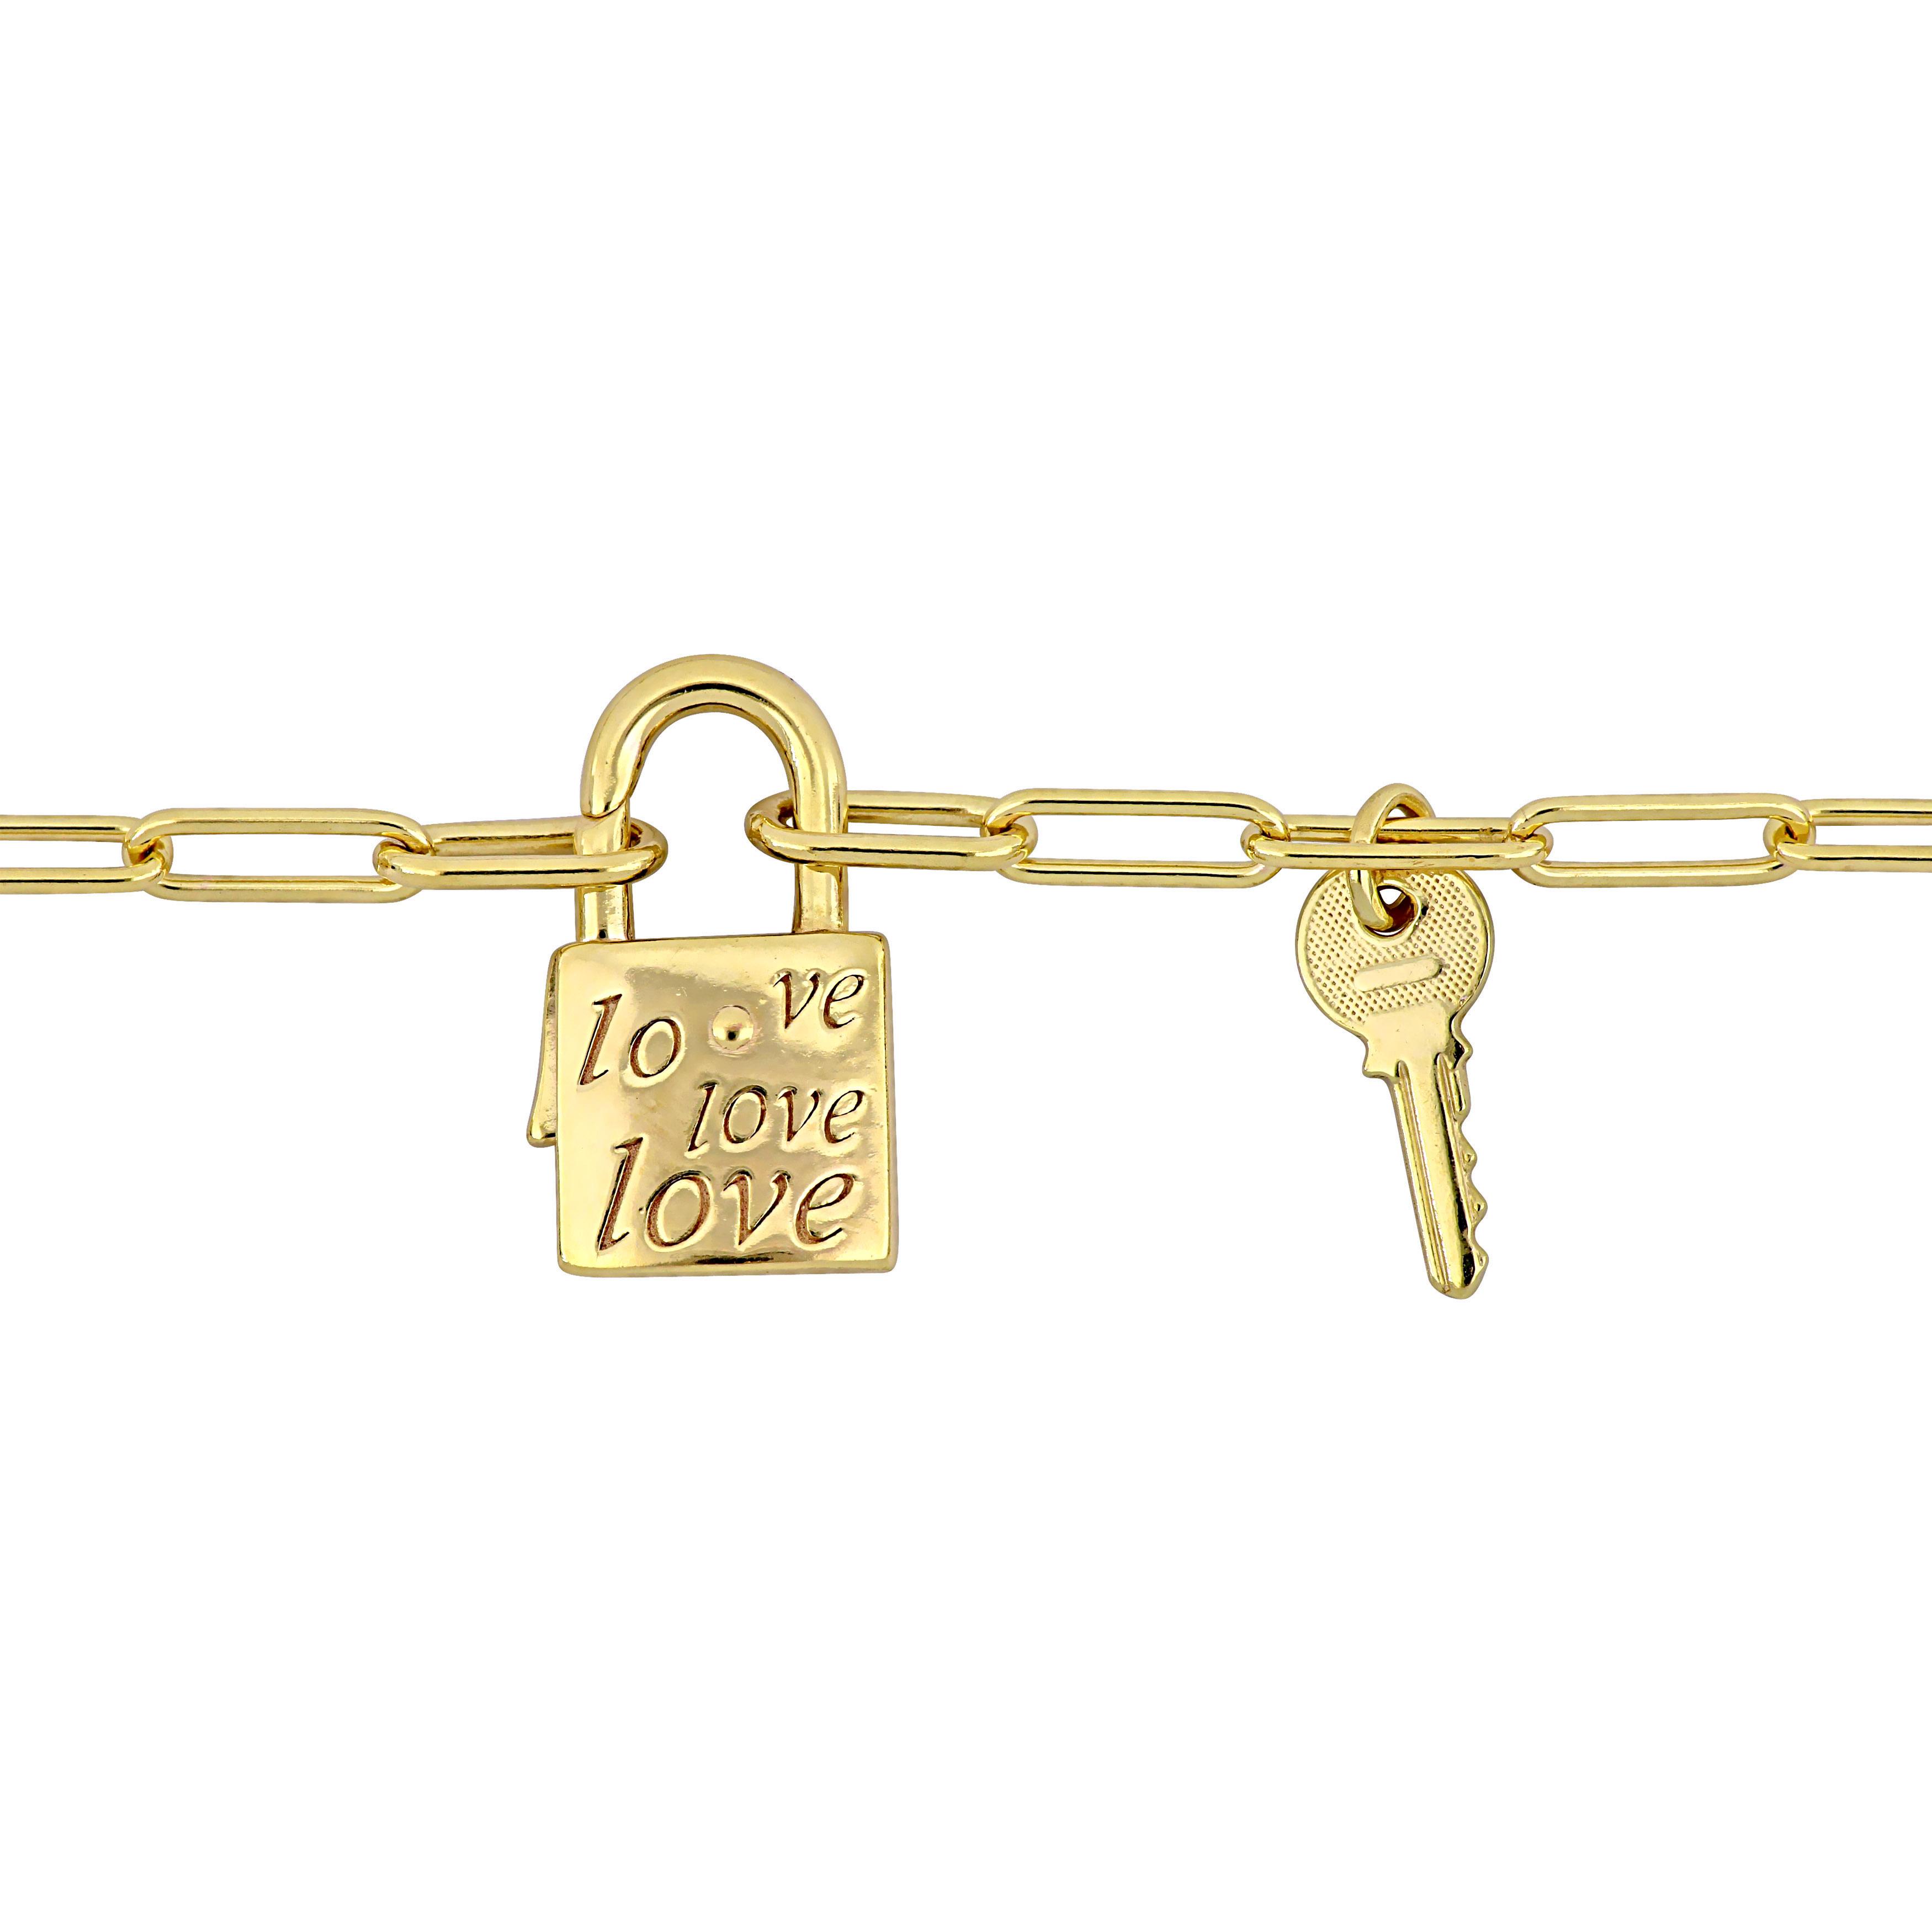 Lock and Key Charm Clasp Paper Clip Link Necklace in Yellow Silver - 20 in.